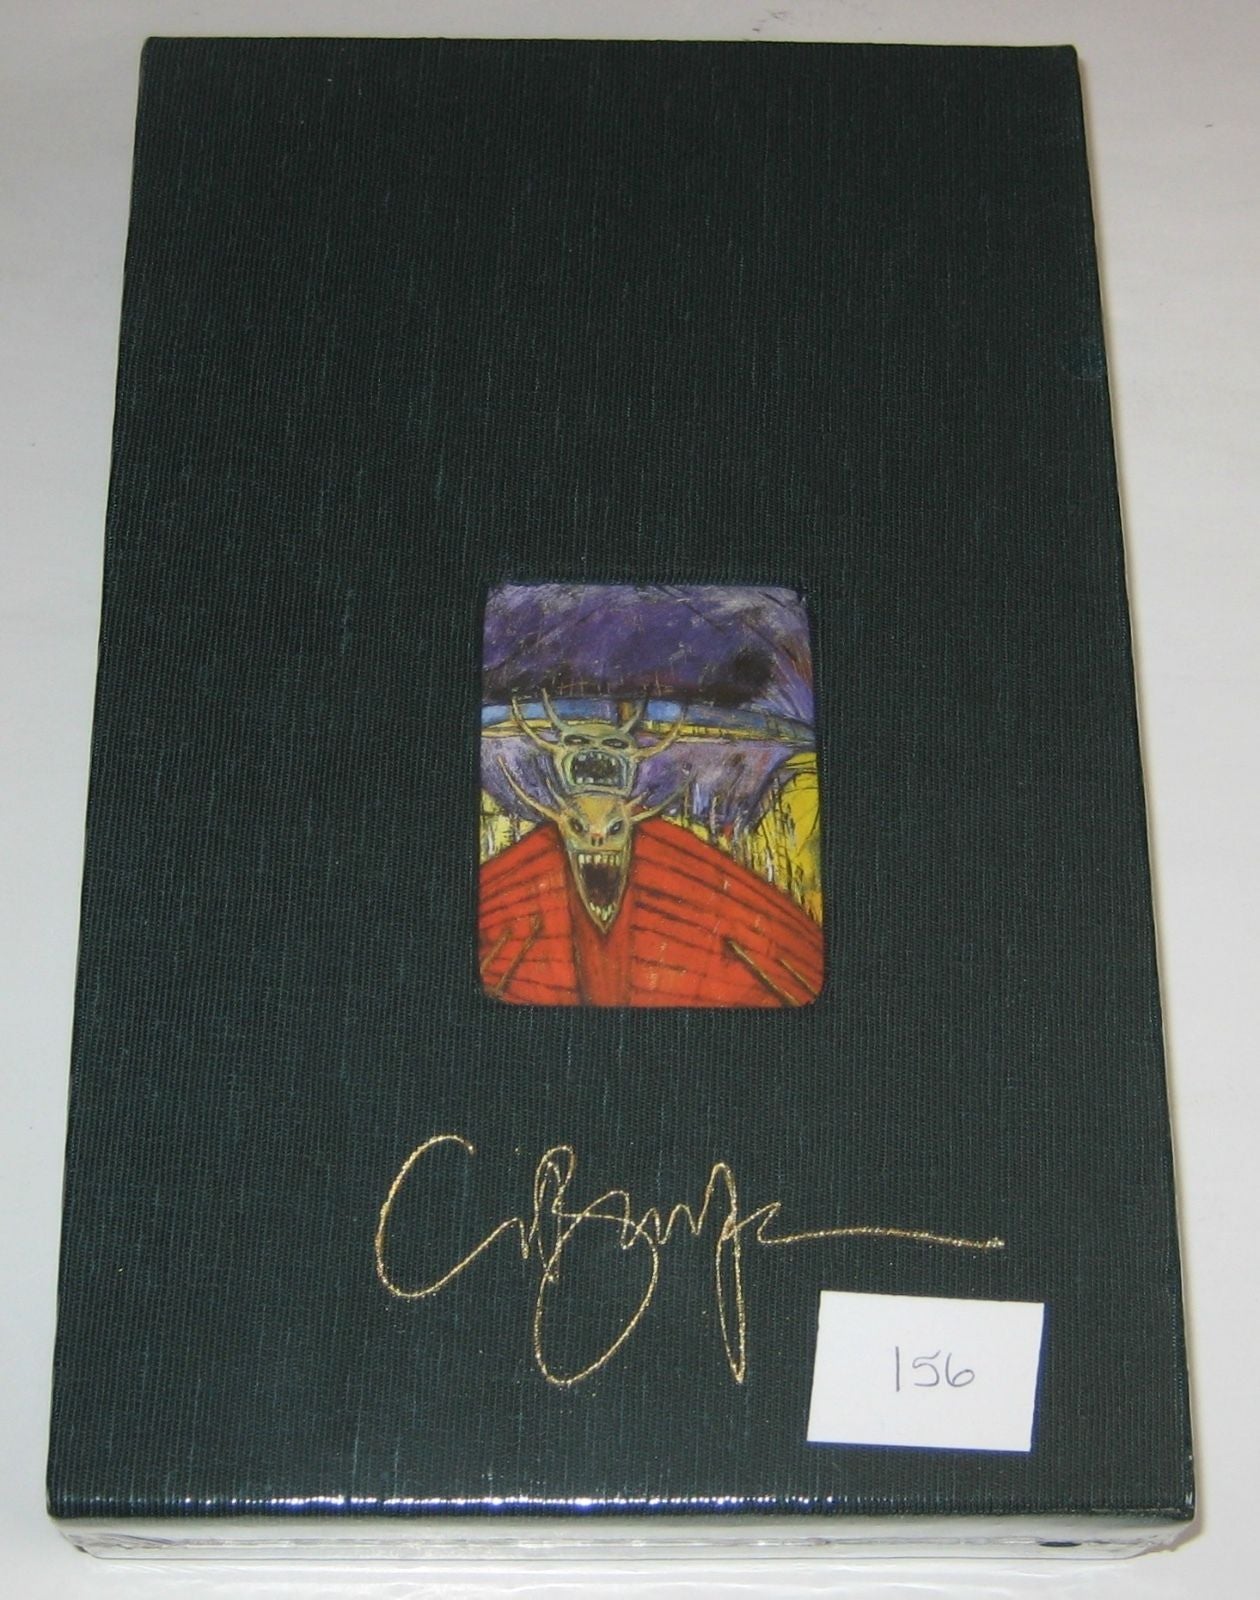 Original Clive Barker Sketch Included With Our Deluxe Signed Copy of Abarat